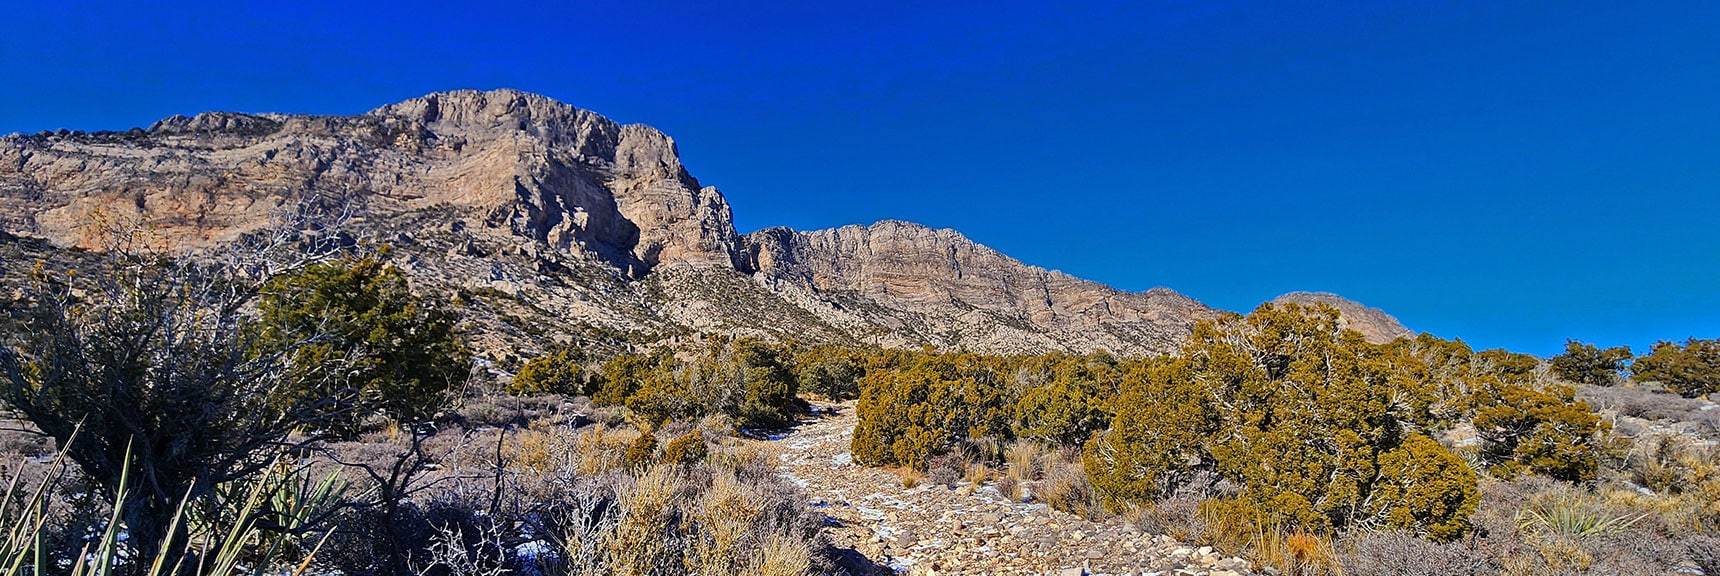 Streamlined Route to the La Madre Mts. Ridgeline with Spectacular Views! | Brownstone Trail | Calico Basin | Brownstone Basin | La Madre Mountains Wilderness, Nevada